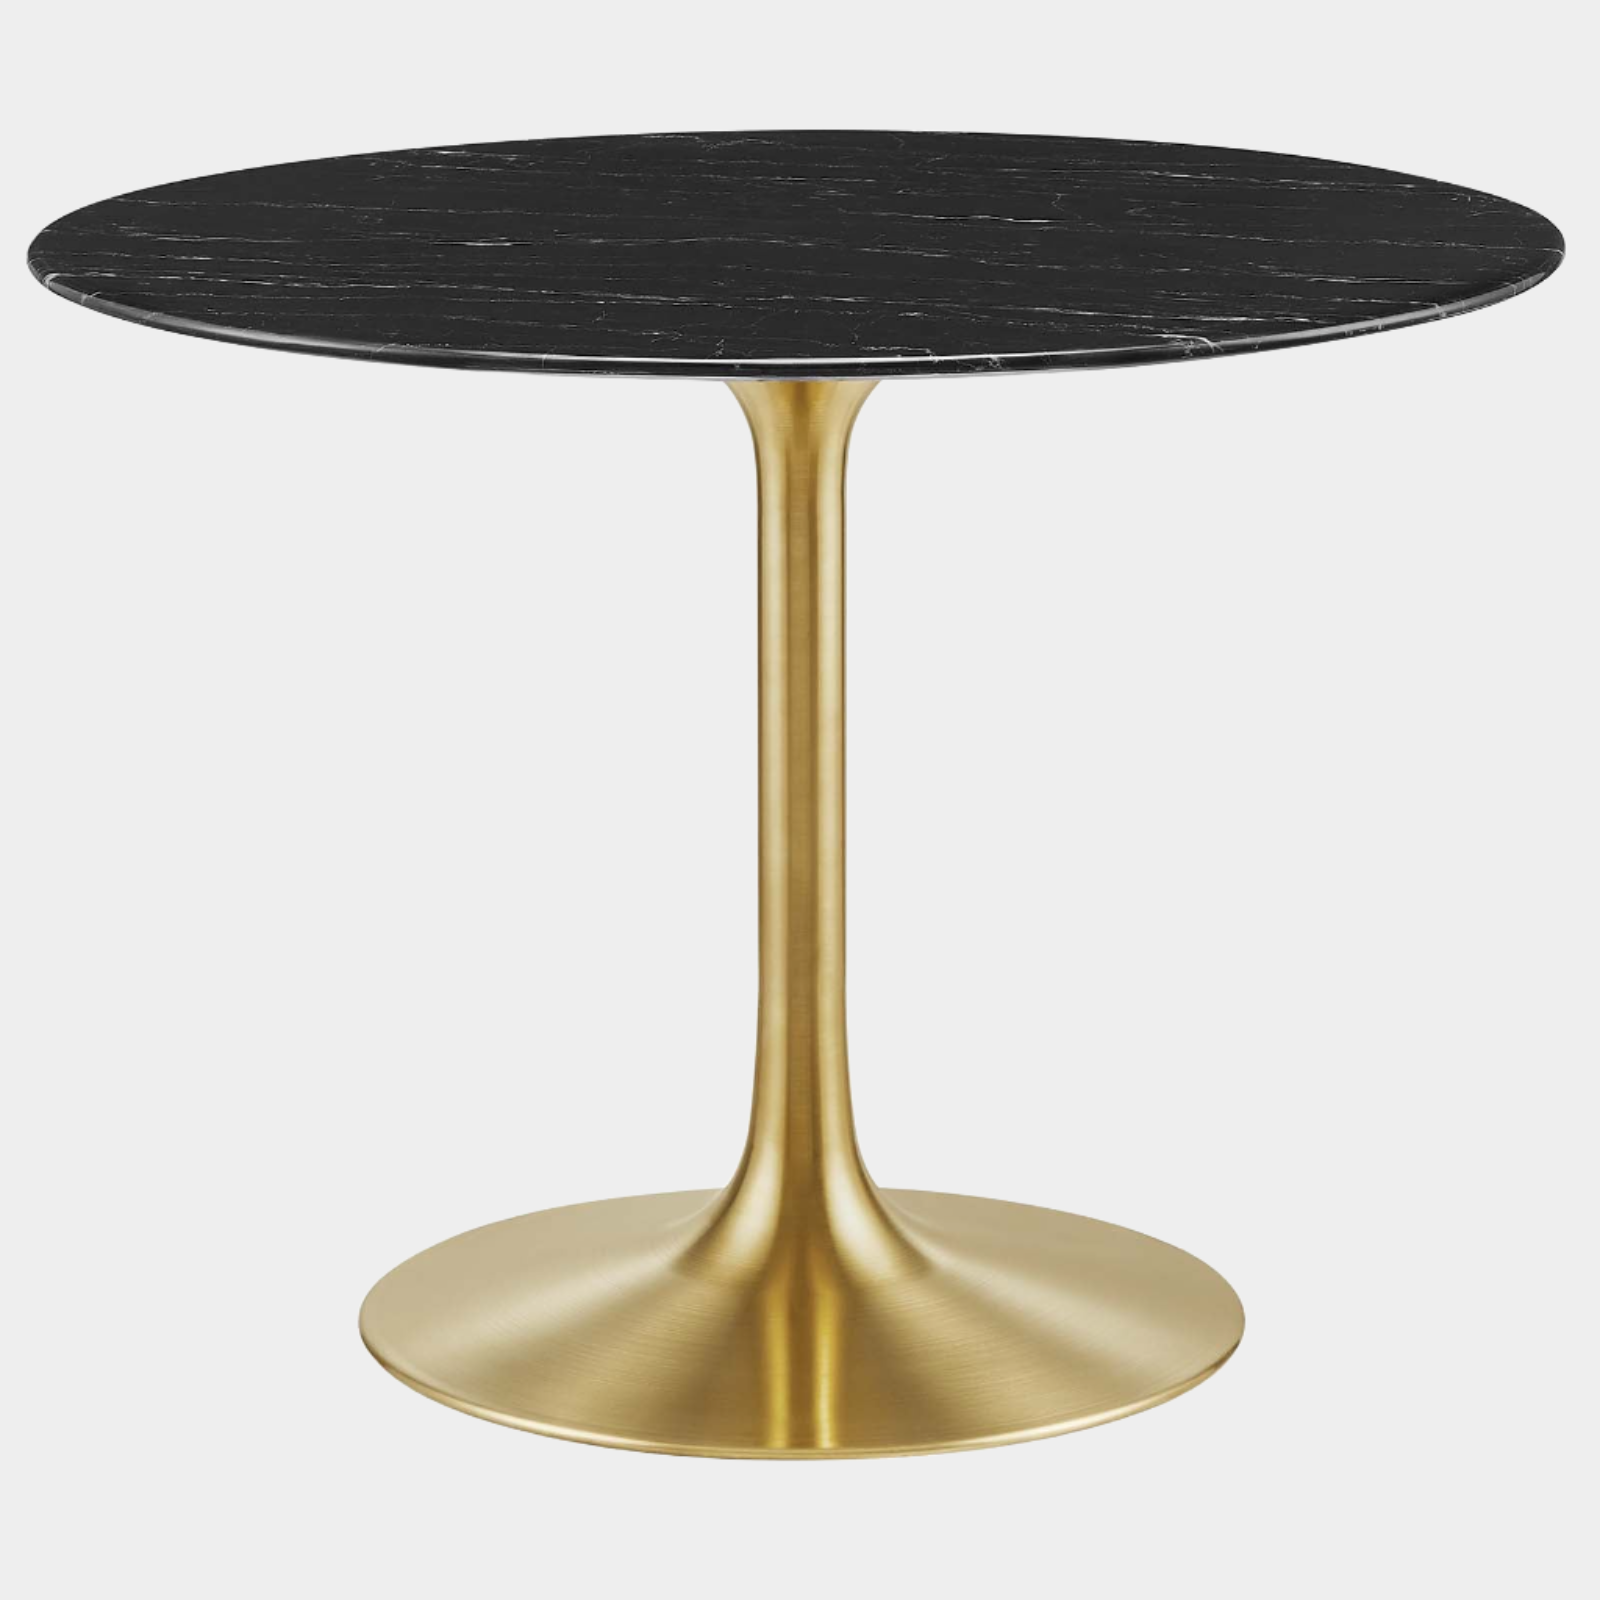 Abstract Urban Dining Table